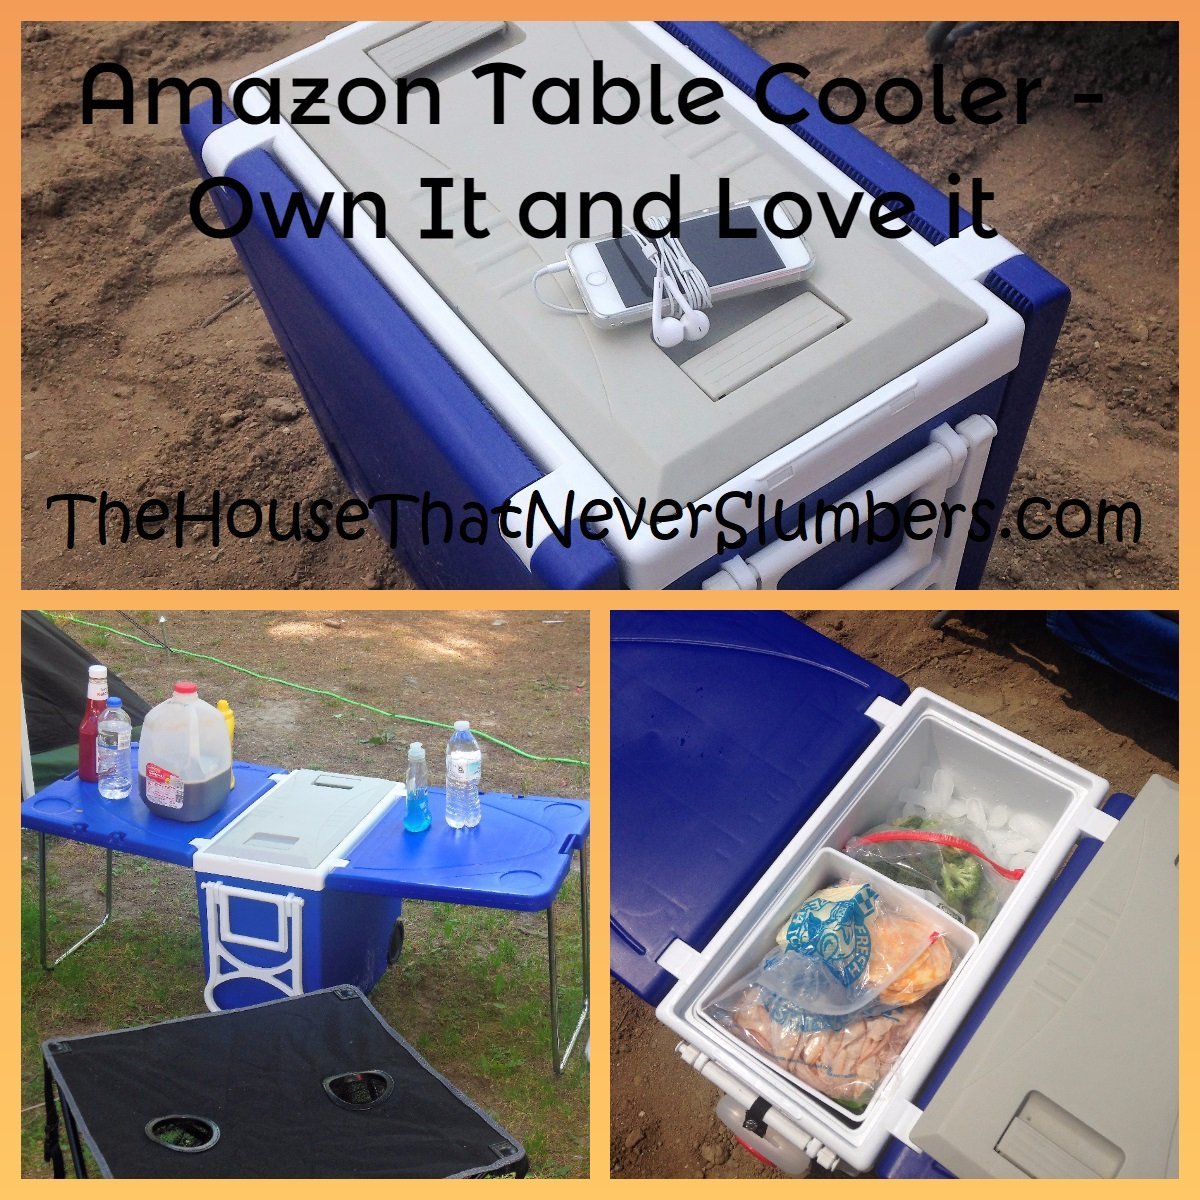 This Table Cooler gets iffy reviews on Amazon, but that surprises me because this is a product I own and love! Check out my full review.